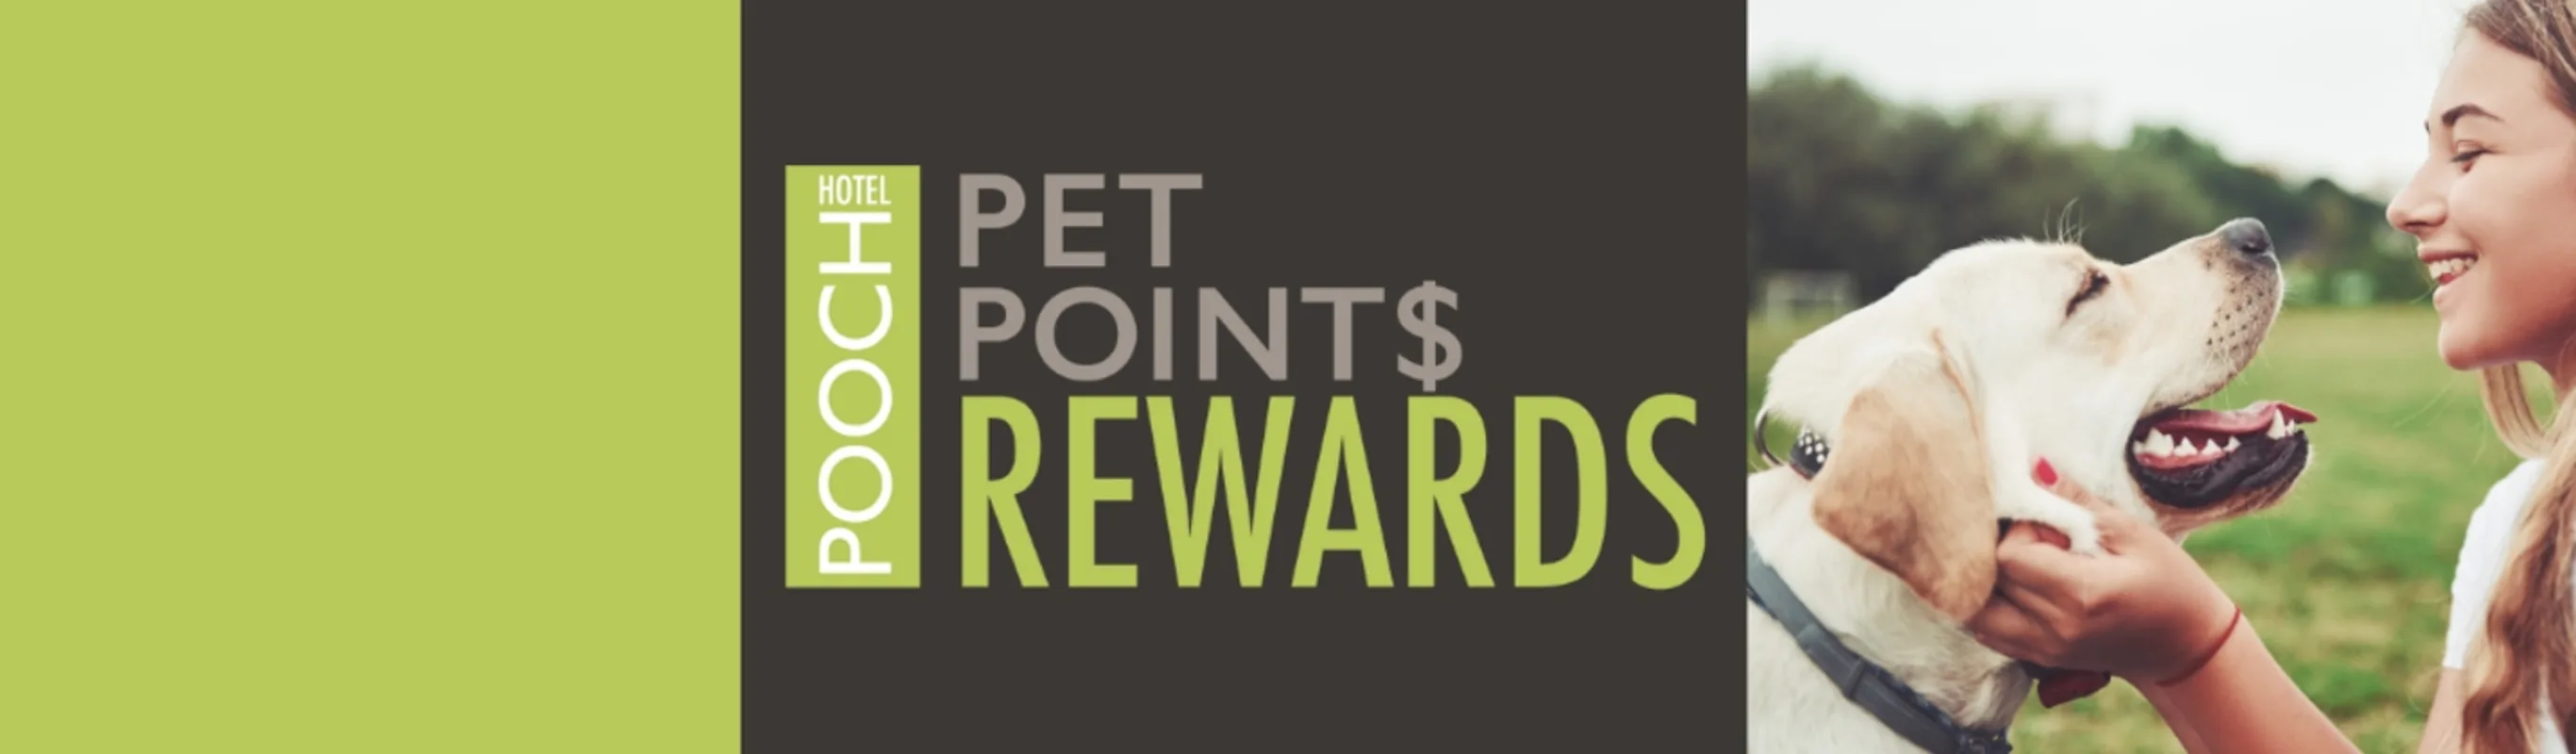 Pooch Hotel's Pet Points Rewards banner in green and charcoal with a woman smiling and holding a dog's face